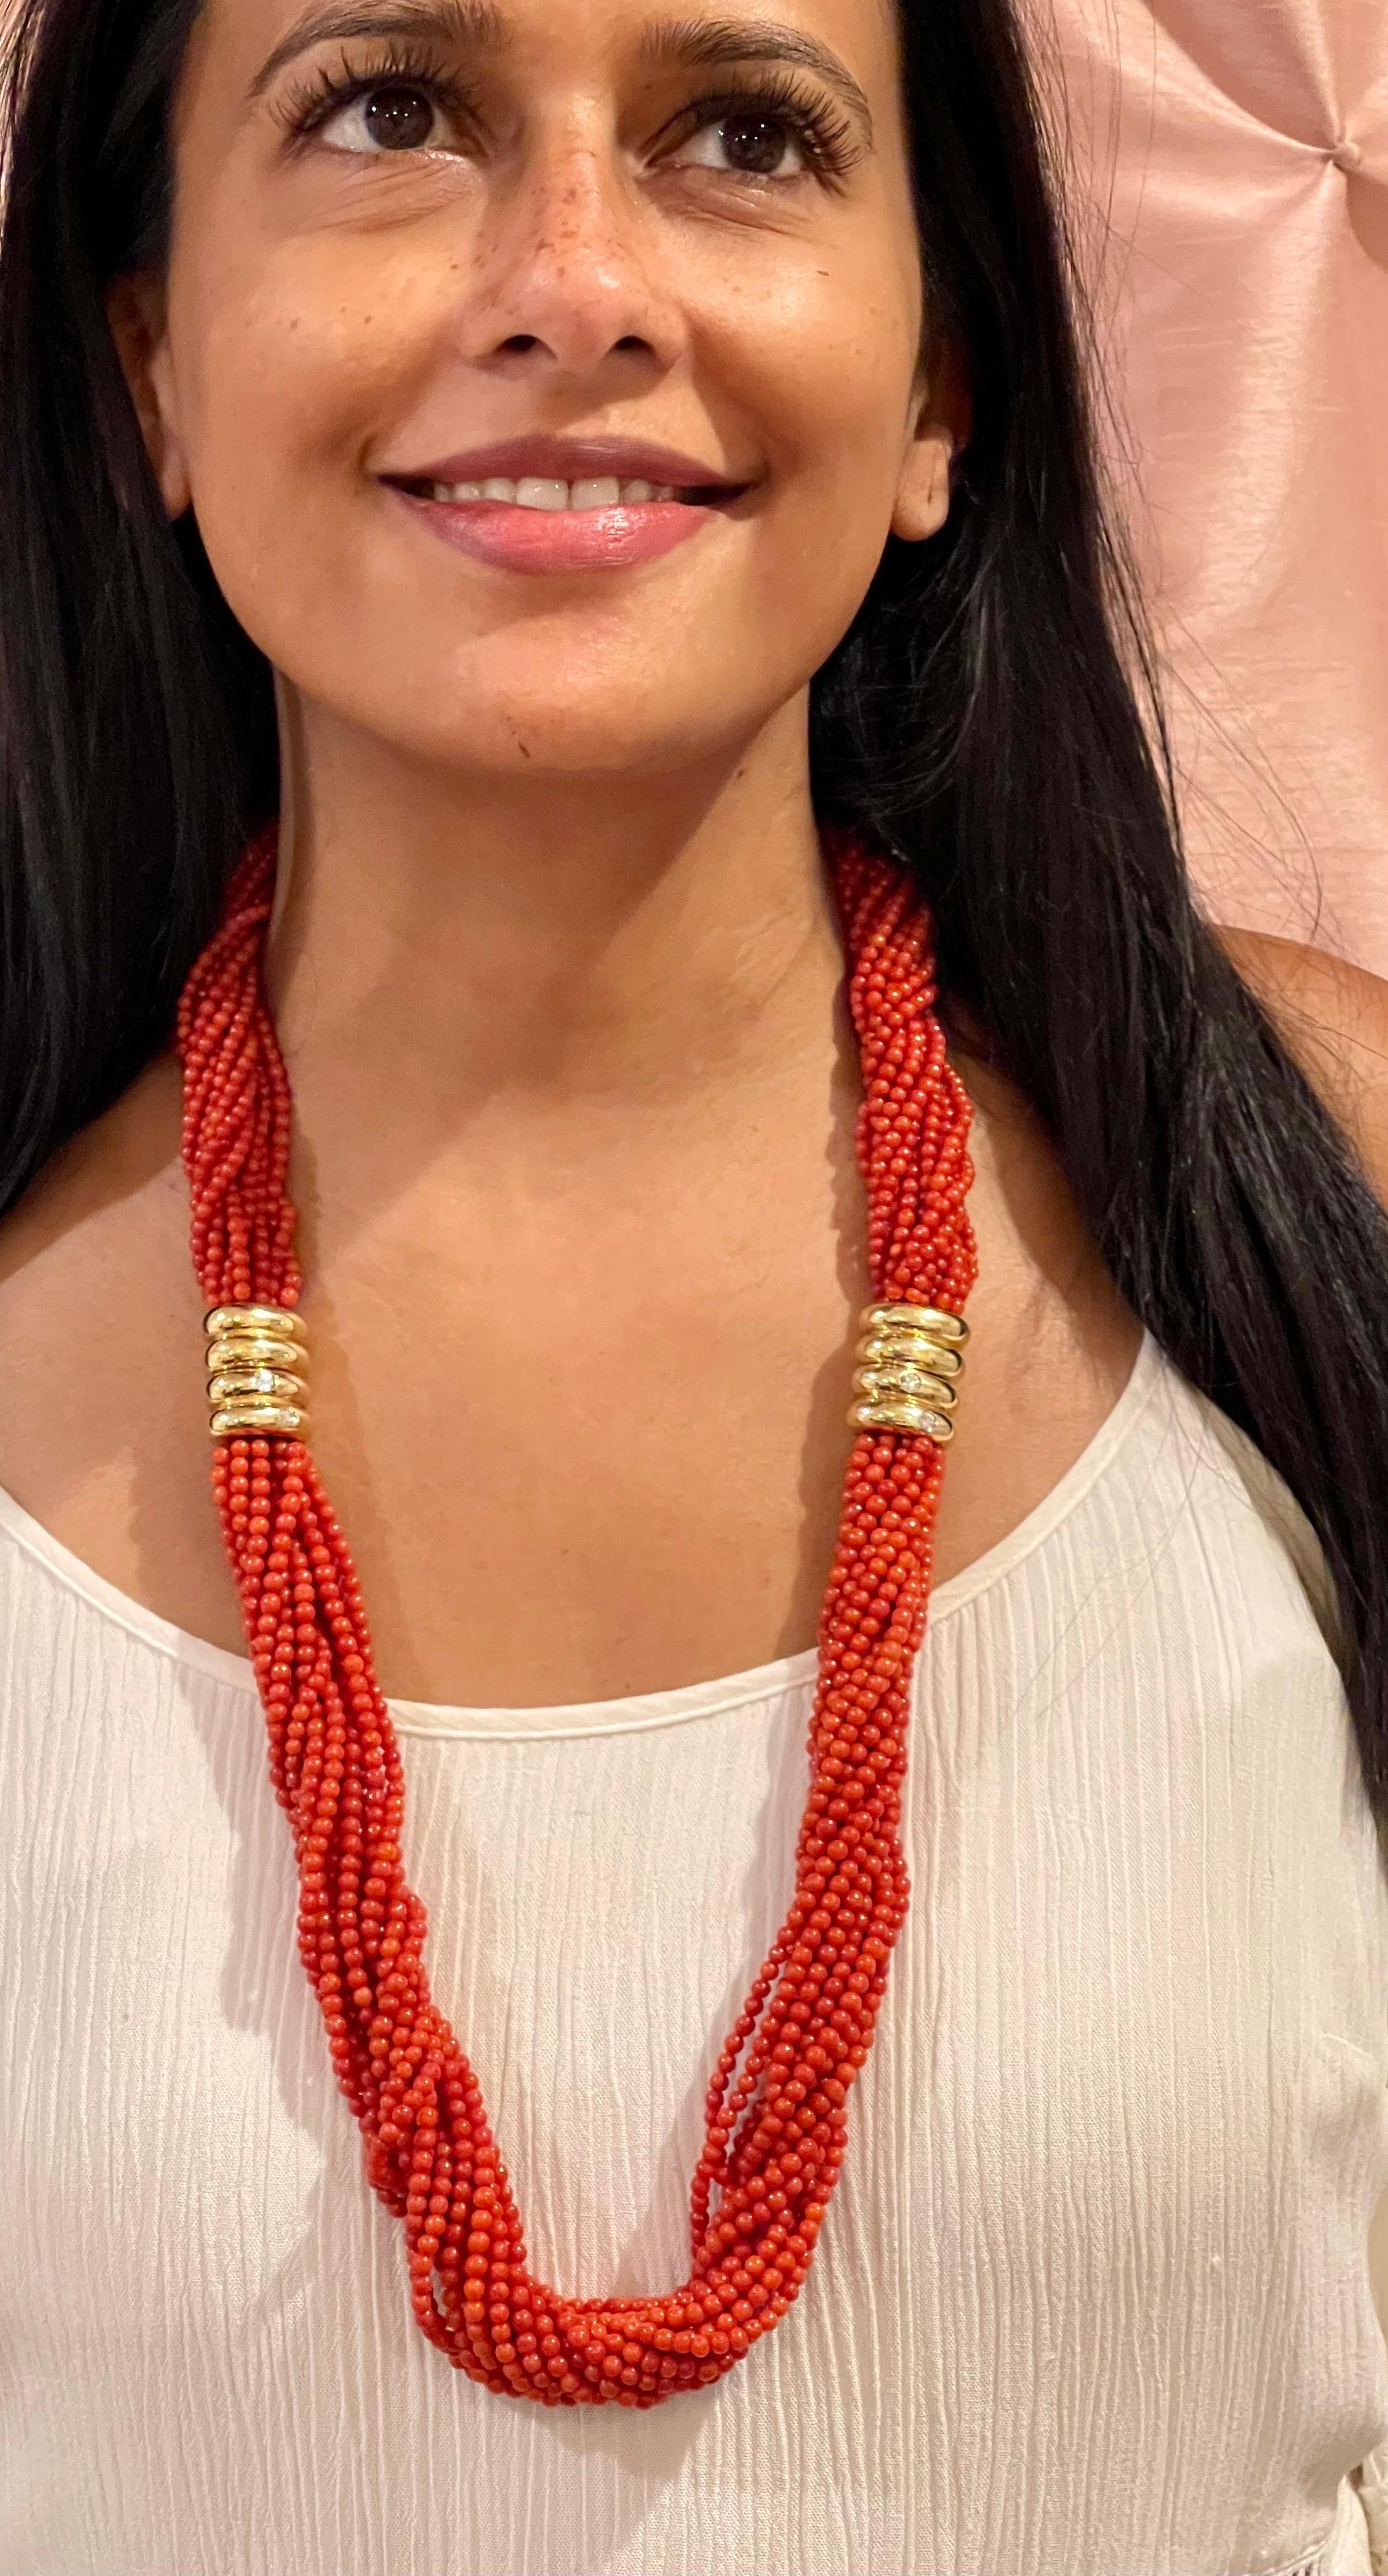 Vintage Natural Coral 3.5 to 4mm Multi Layer 16 Strand 1080 CT Bead Necklace 18 KY Gold, 33-34 Inch long
A vintage piece.
There are two necklaces of 16.5-17 inch long which can be clasped together for a long necklace of 33-34 inch long and both gold